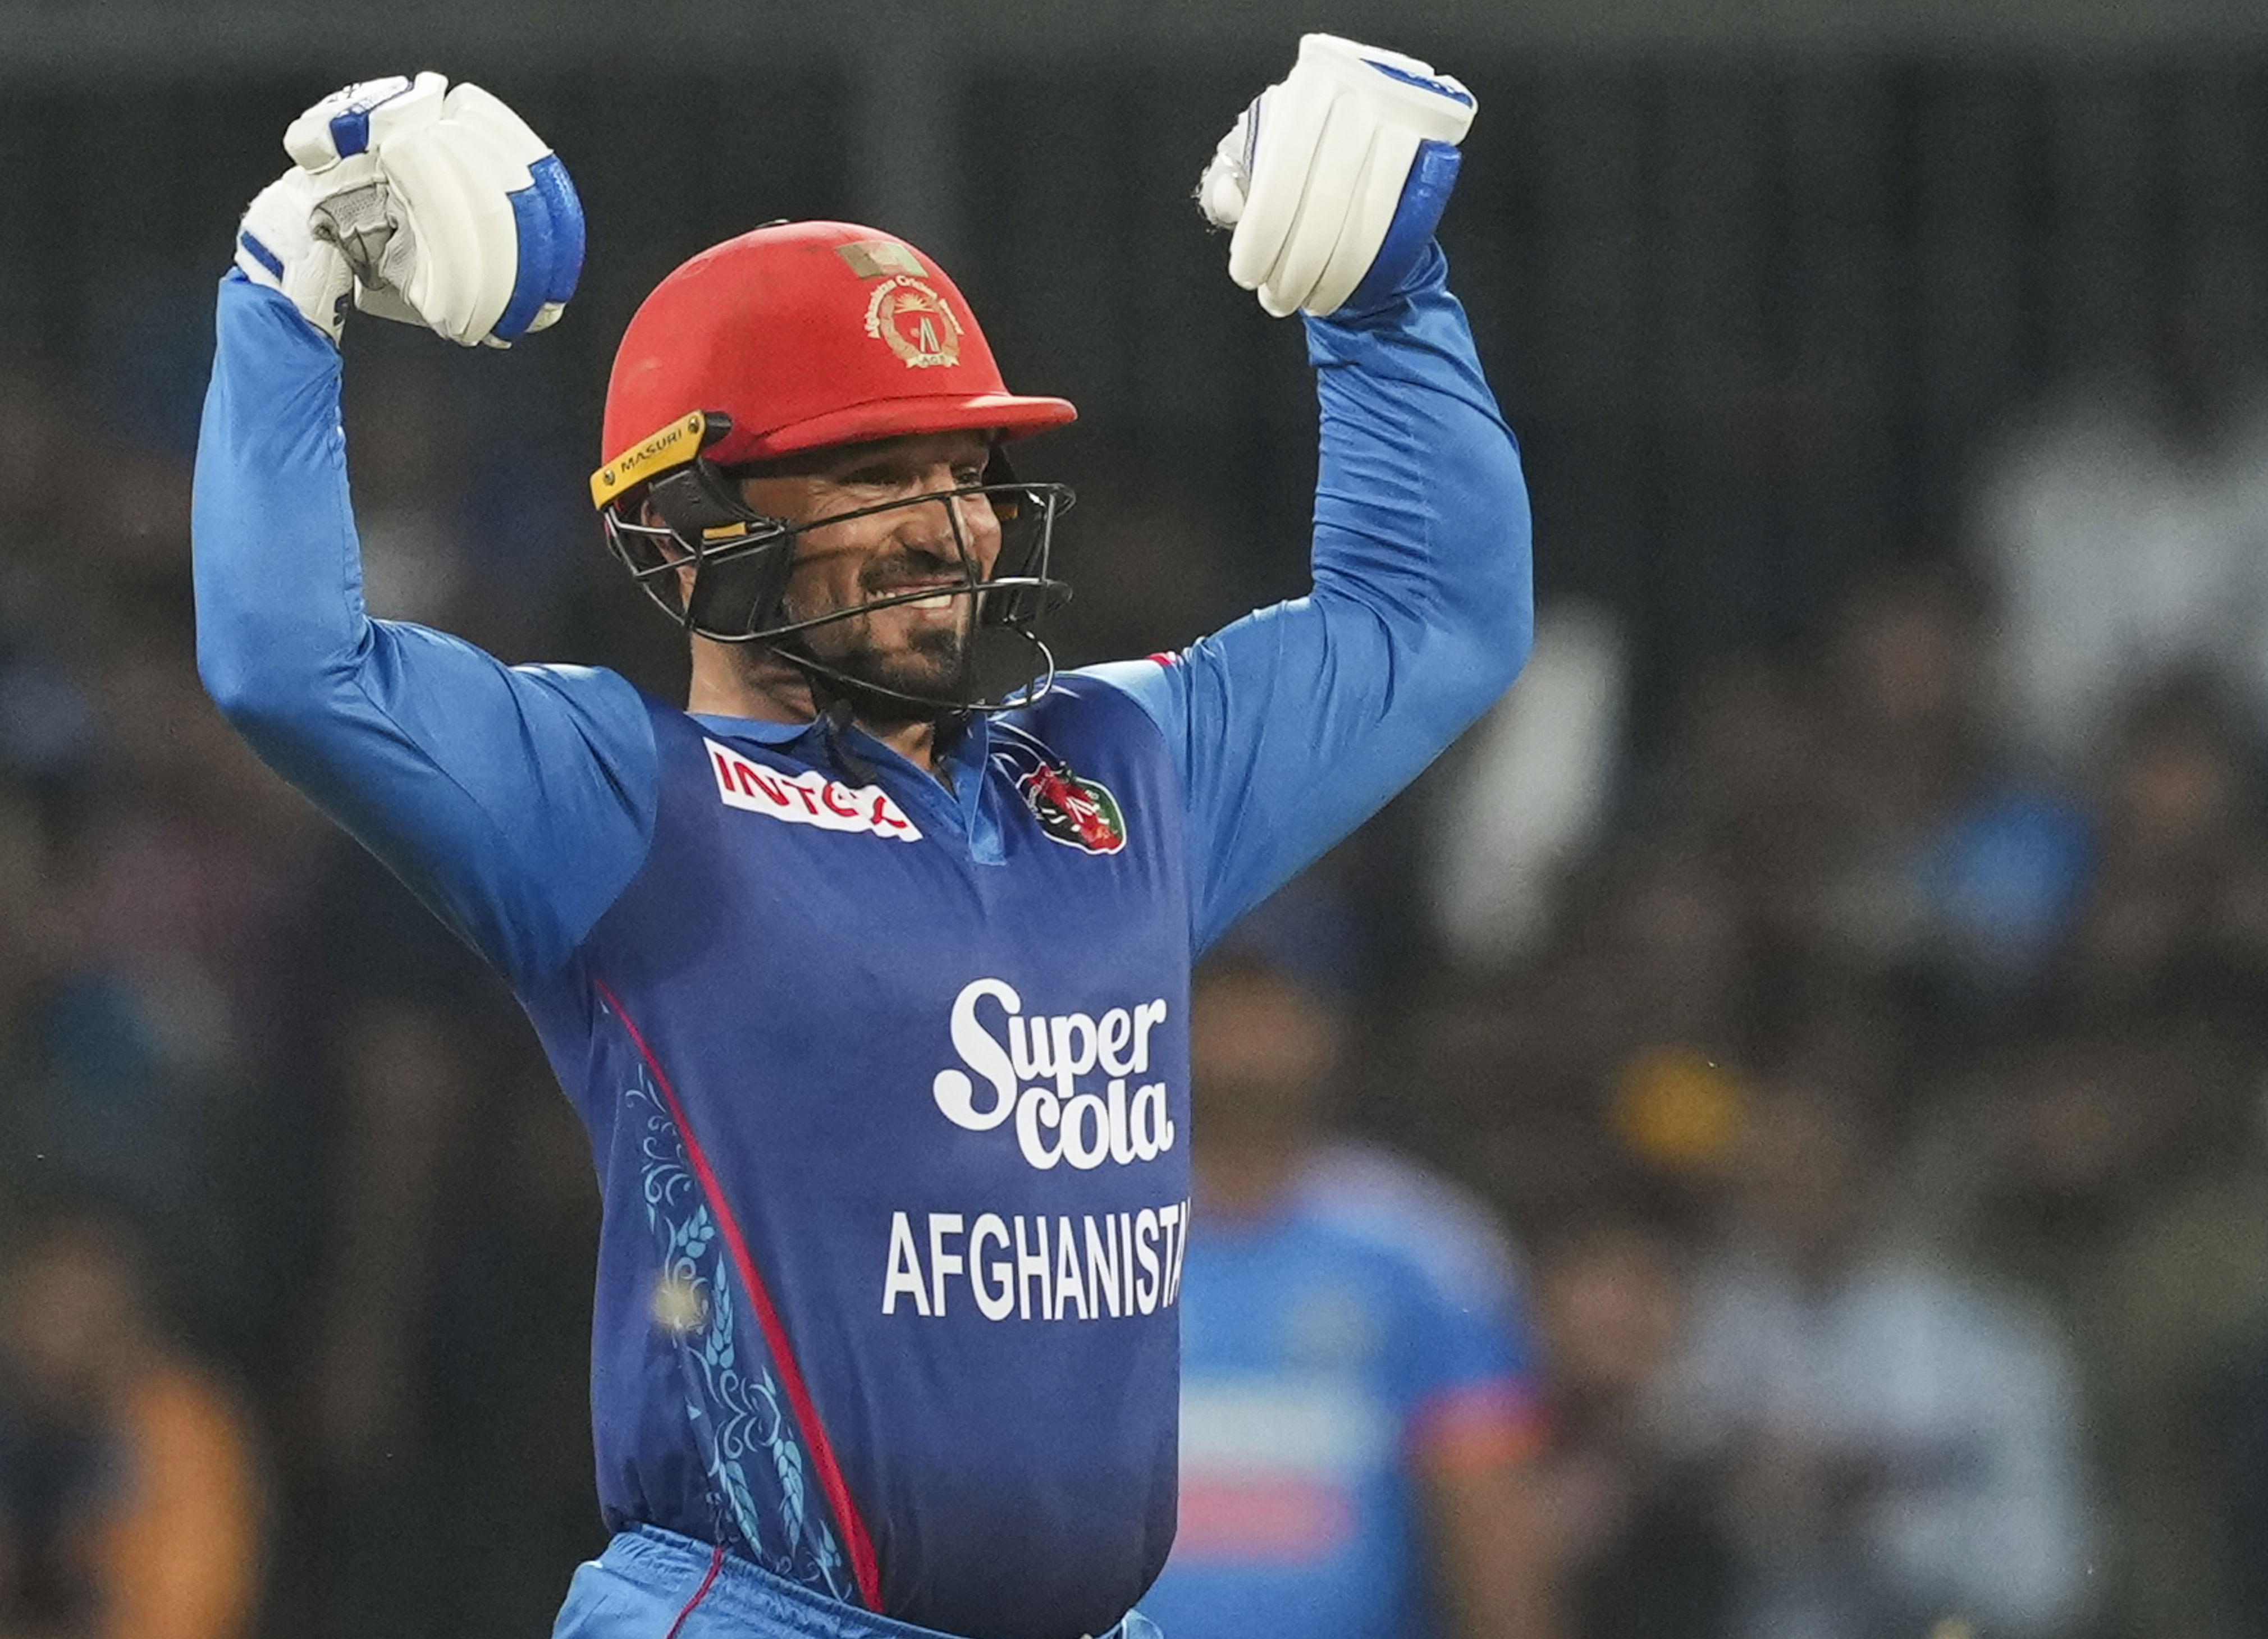 gulbadin, lower-order batters lift afghanistan to 172 all out